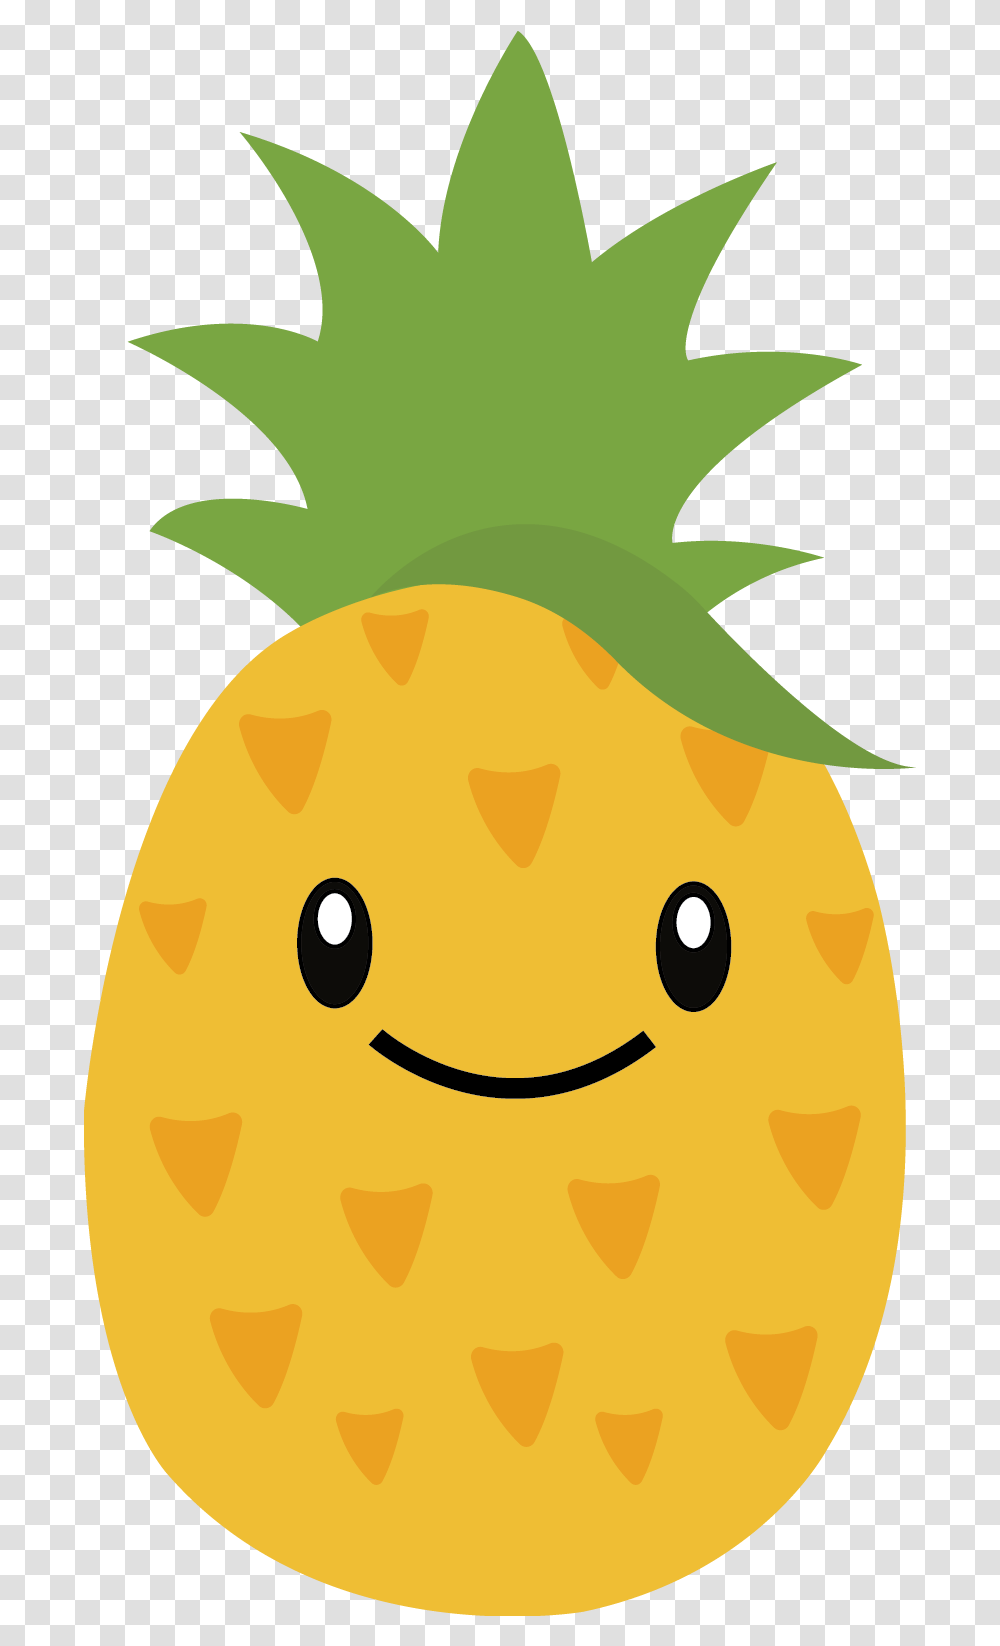 Download Hd Pineapple Pineapple With Face Pineapple With Face, Plant, Food, Fruit, Citrus Fruit Transparent Png